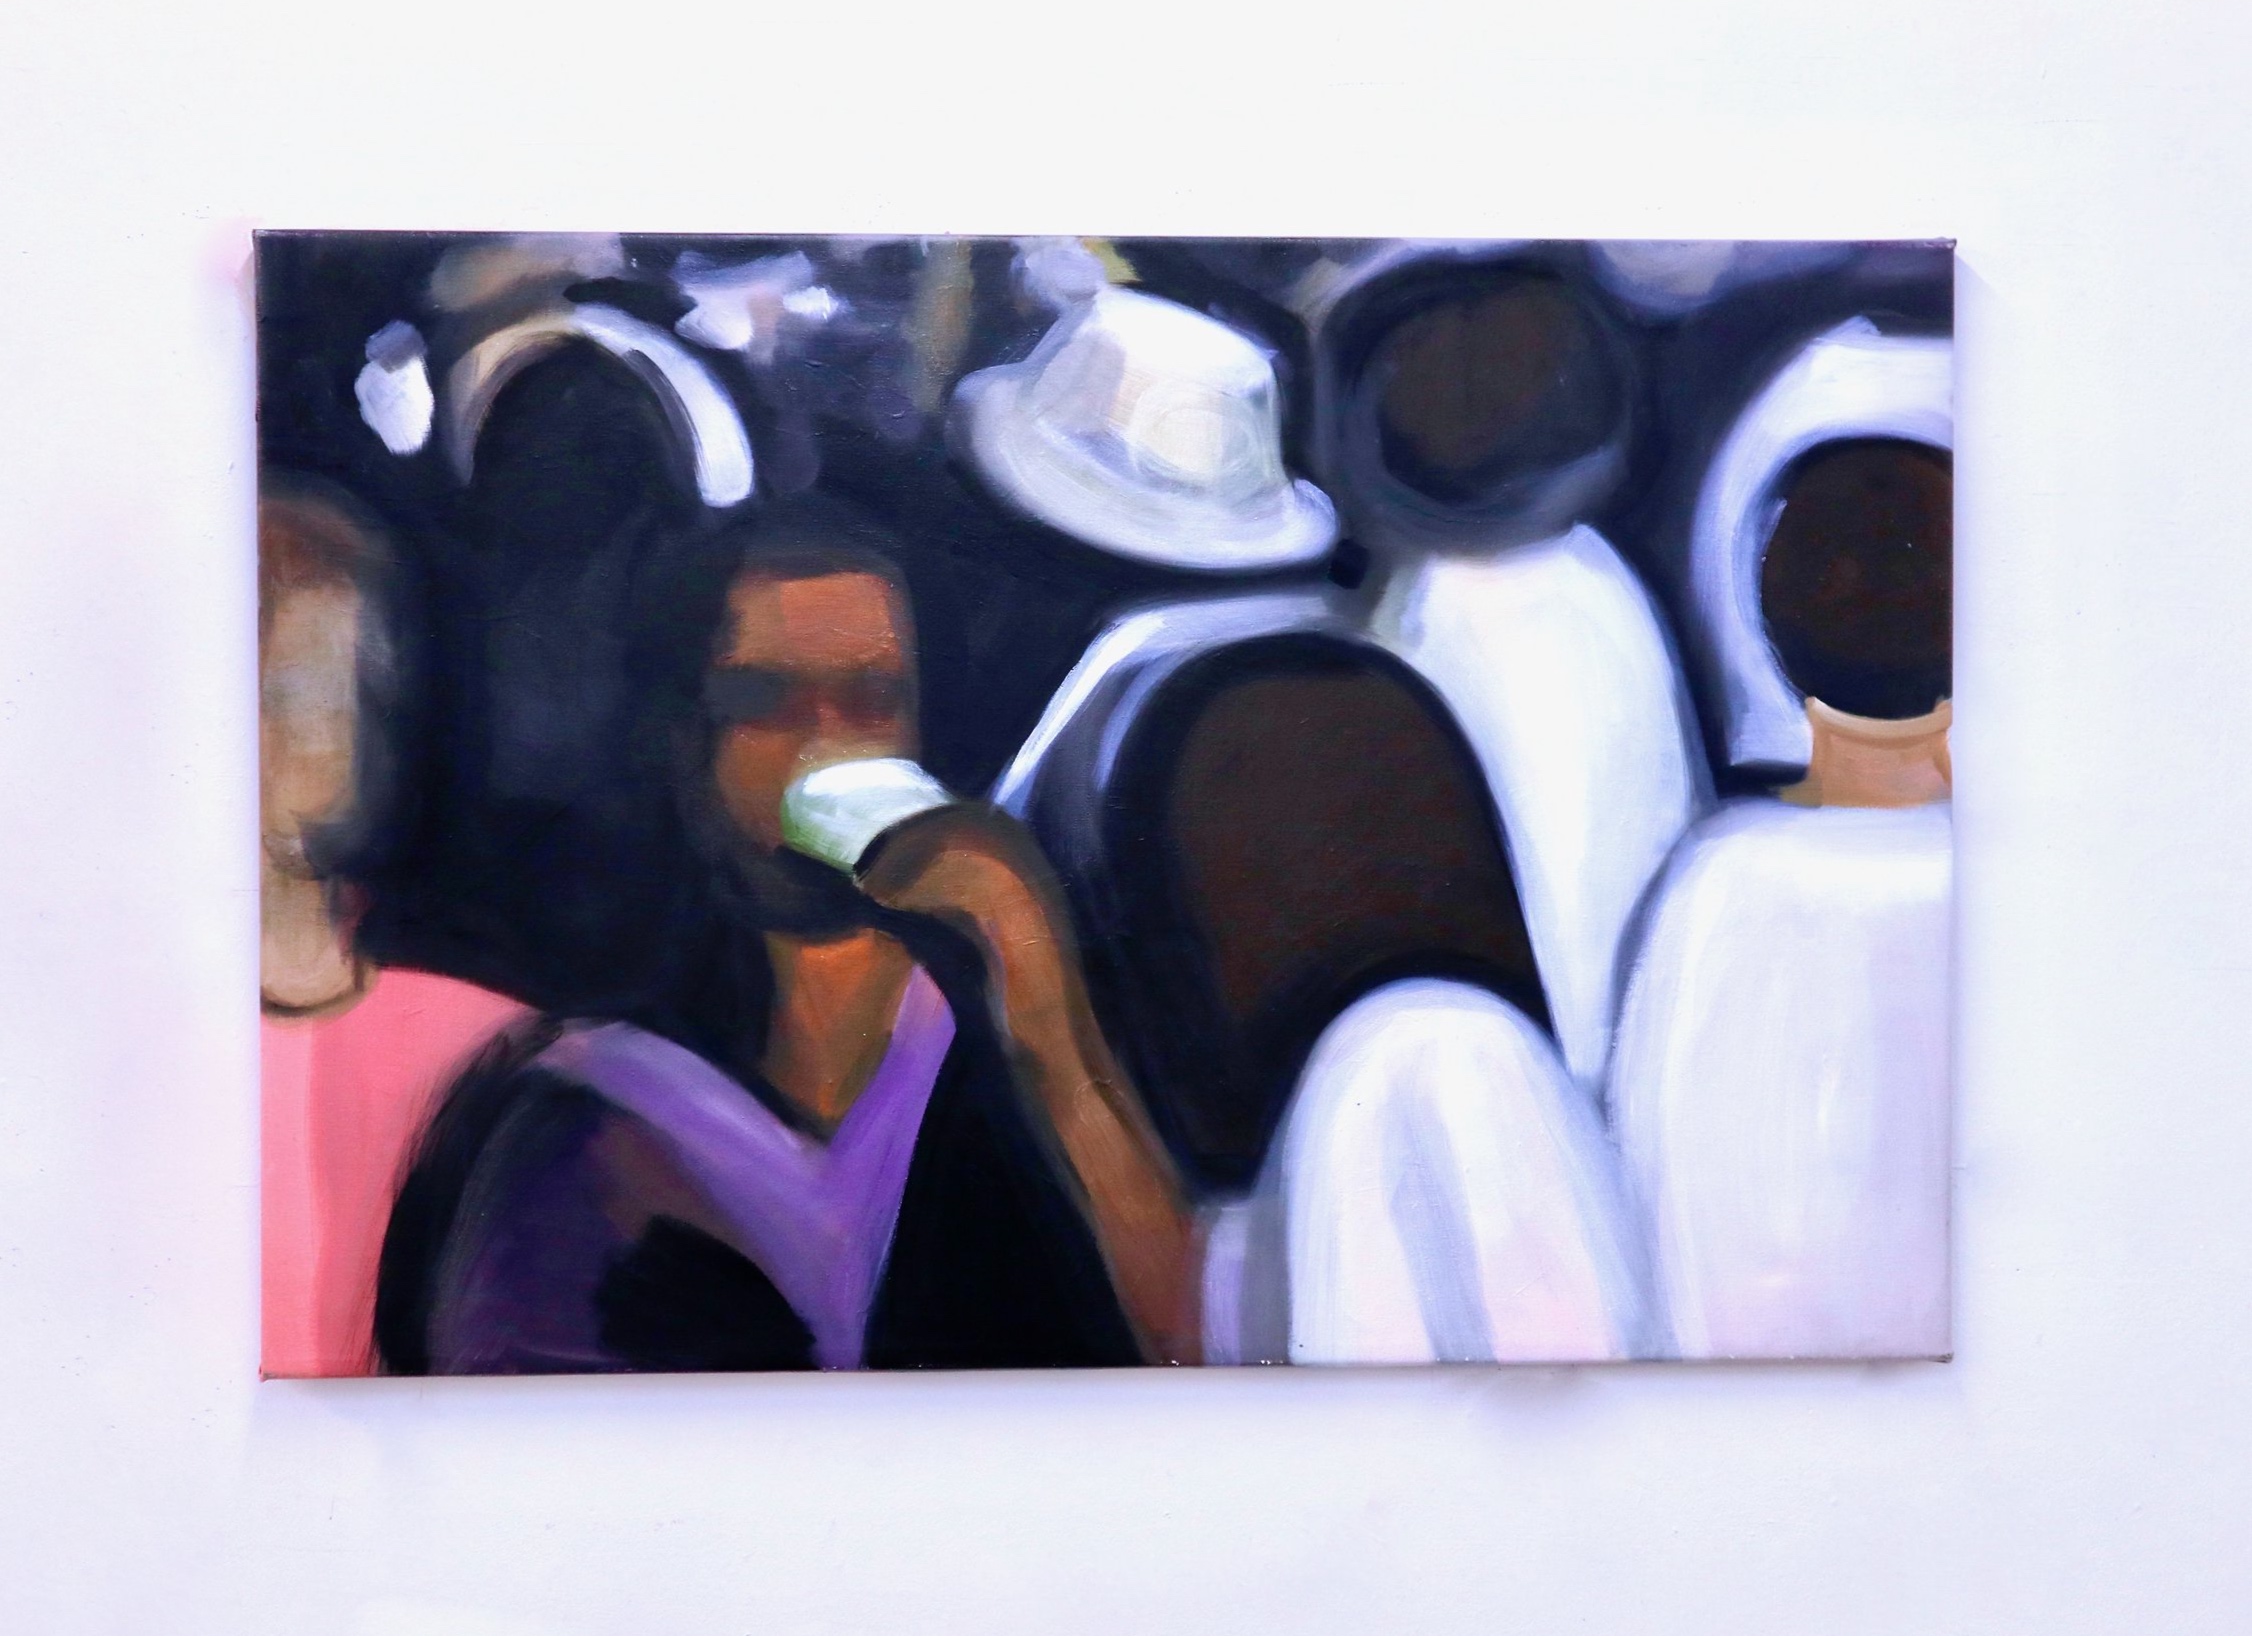   Drinks , 2019 Oil on canvas 90 x 135 cm 35.4 x 53.1 inches   